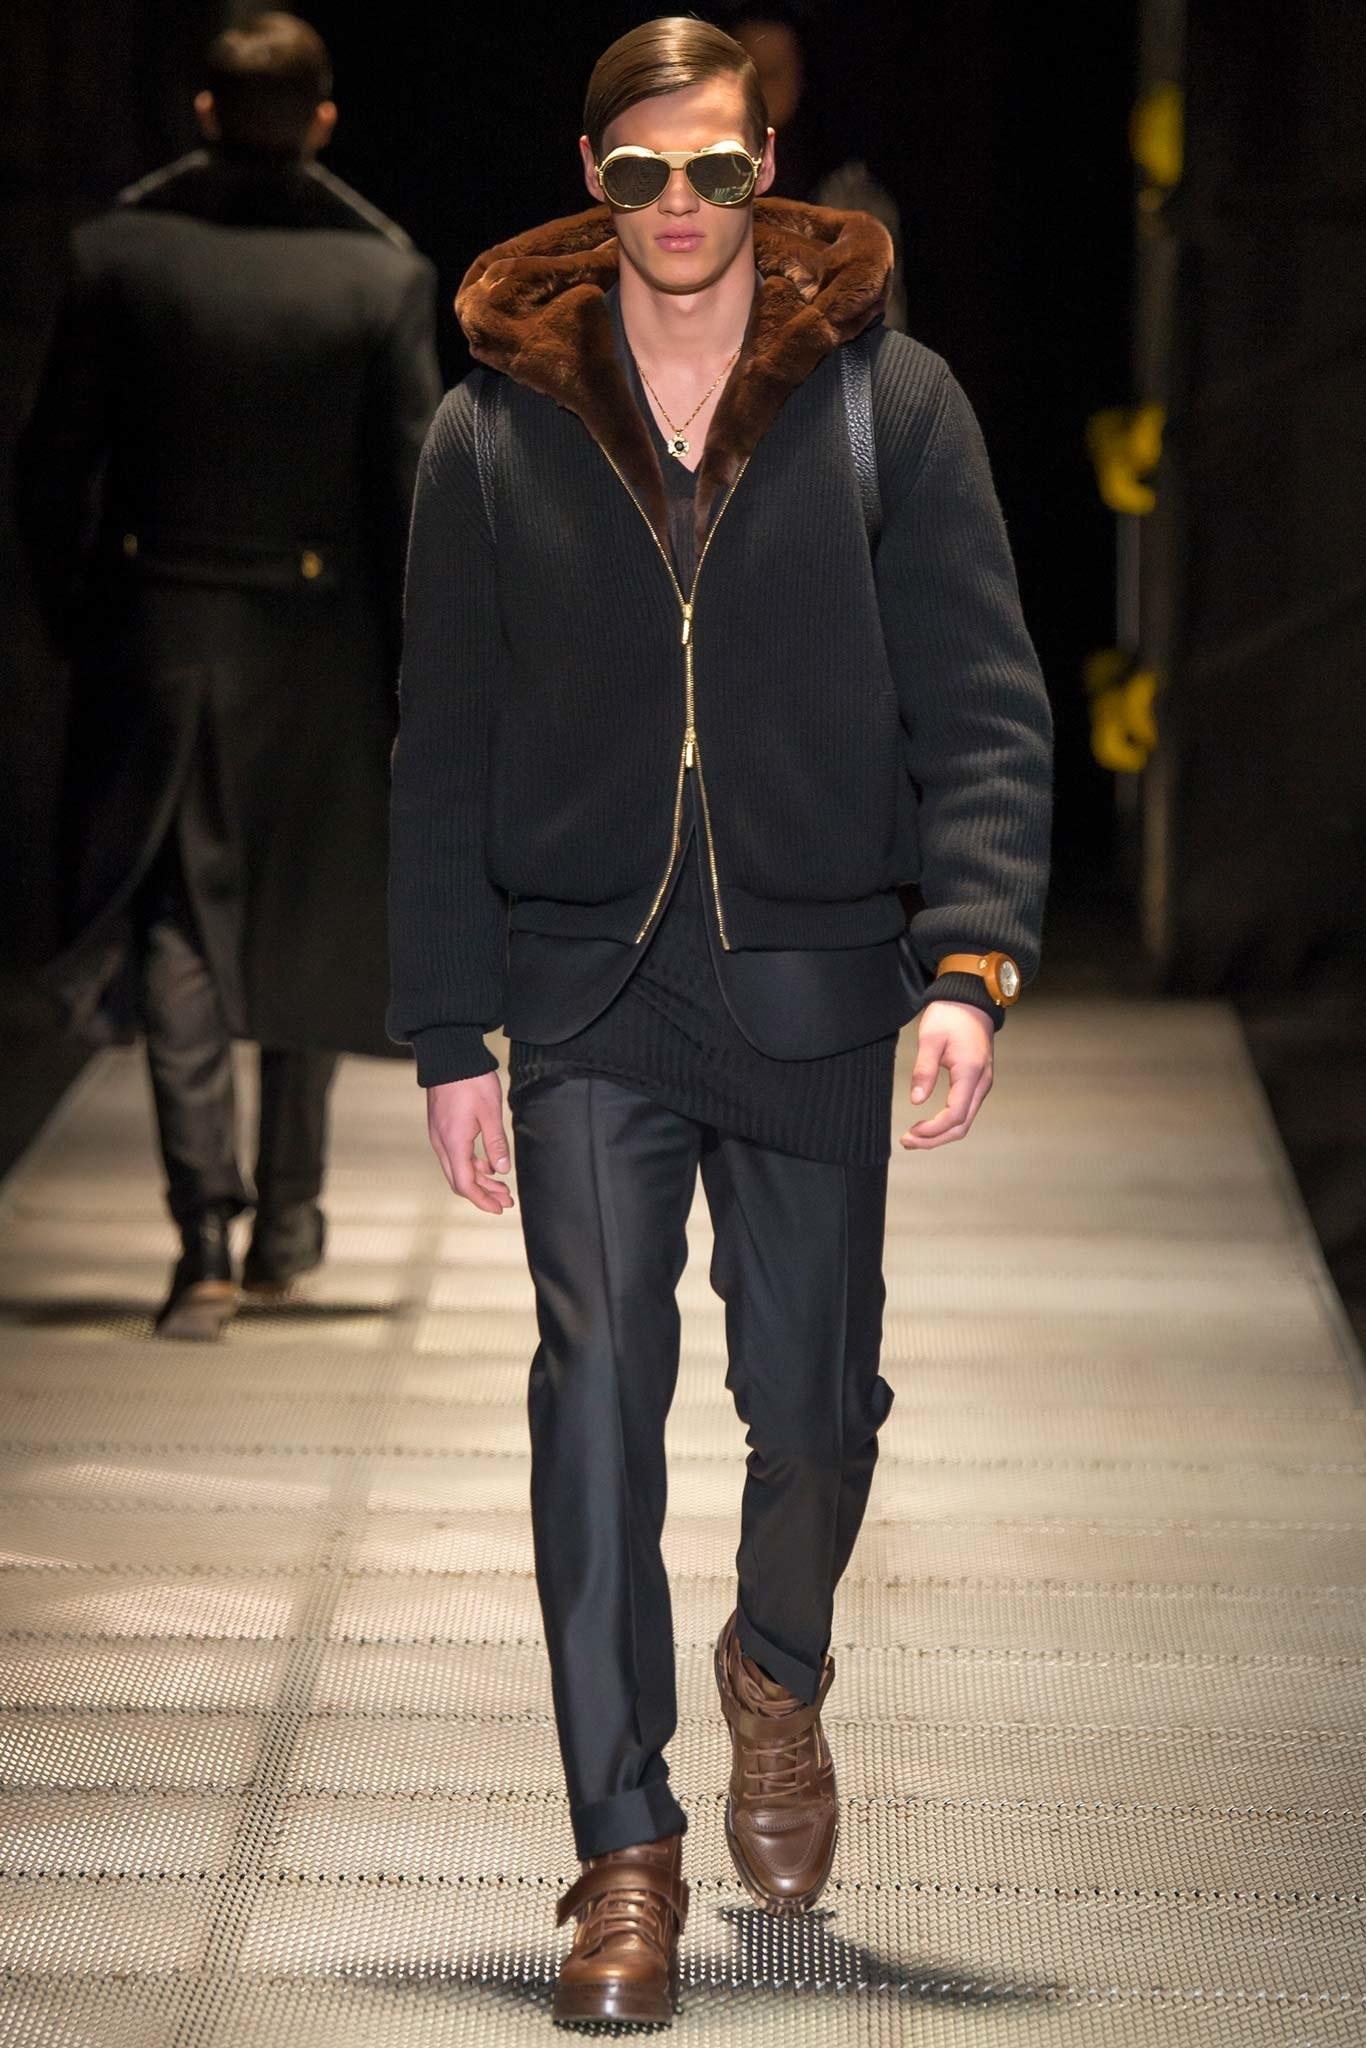 VERSACE  SUIT
Actual runway sample Fall/Winter 2015 look # 14 

Black cashmere and silk suit 
Very soft and comfortable
Two button closure
Two pockets on jacket
Gold-tone Medusa buttons

Content: 90% wool, 10% cashmere
lining: 63% viscose, 37%